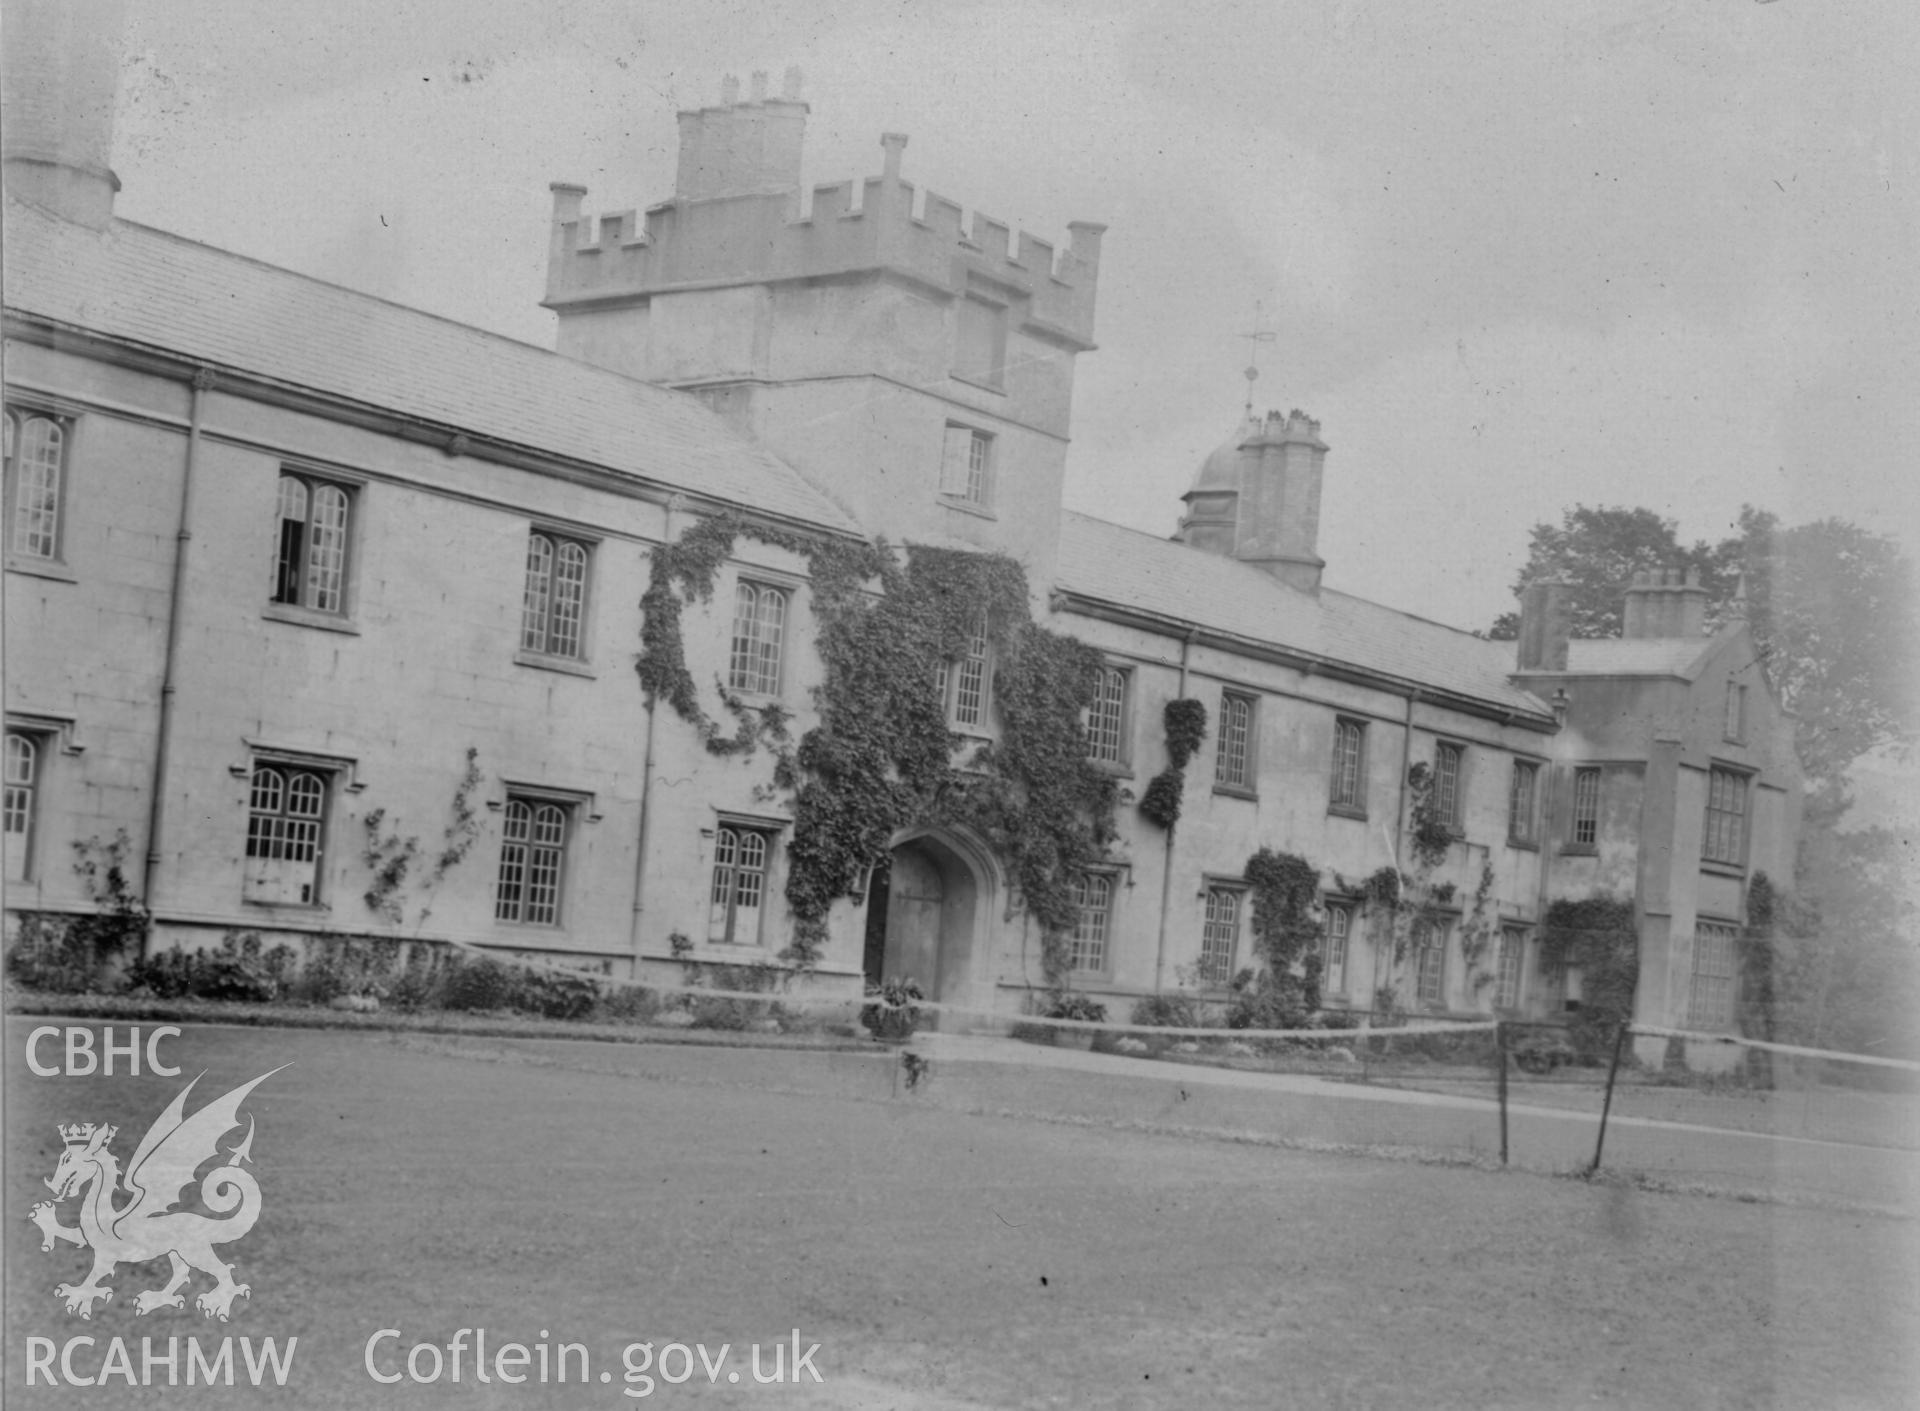 "Lampeter College, 1910". Digitised from a photograph album showing views of Aberystwyth and District, produced by David John Saer, school teacher of Aberystwyth. Loaned for copying by Dr Alan Chamberlain.